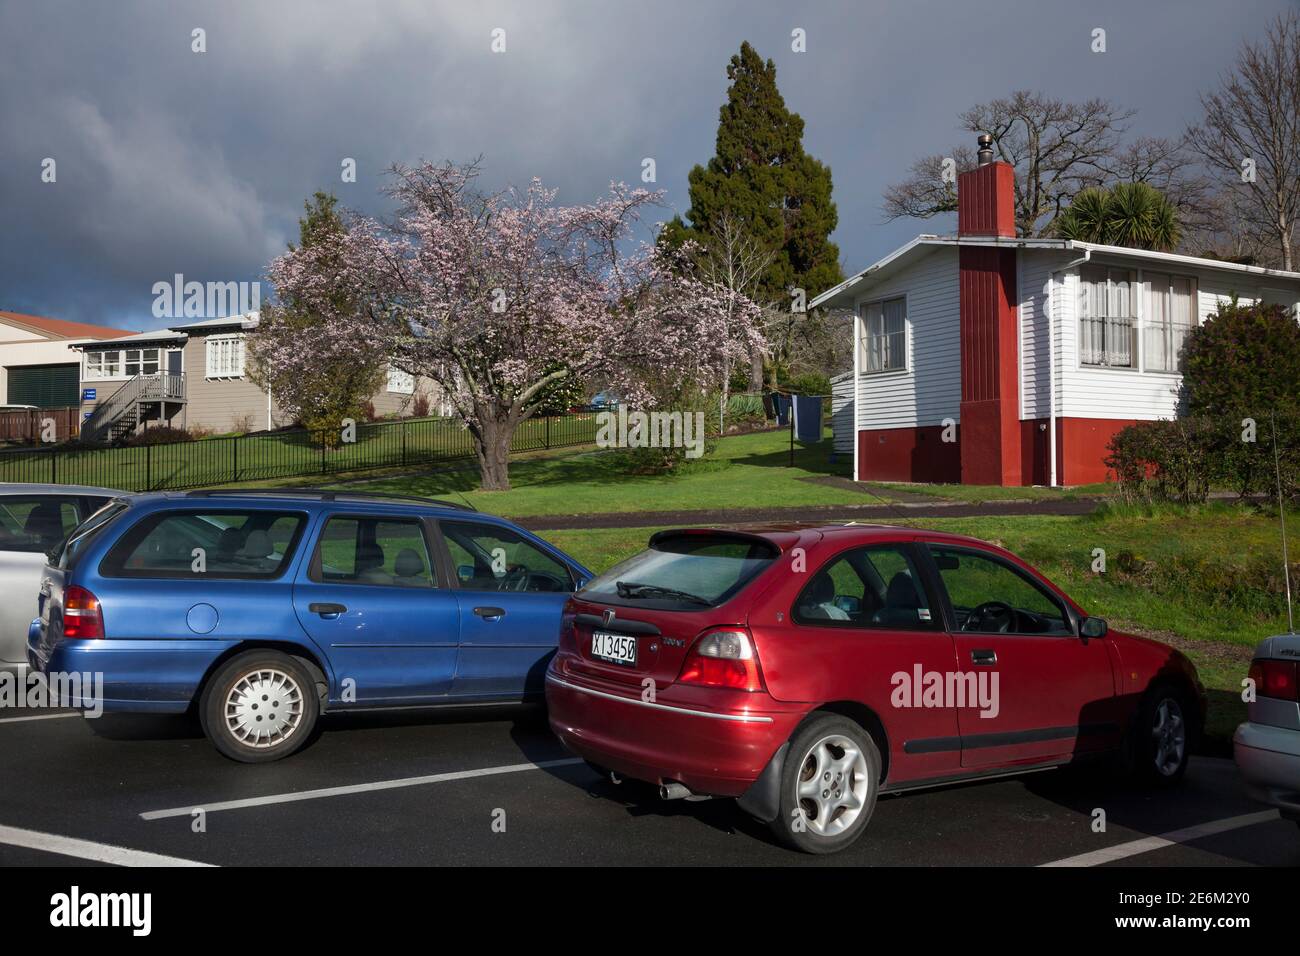 Horizontal shot of some cars parked in Rainguru St in front of a colorful detached house garden, Rotorua, North Island, New Zealand Stock Photo